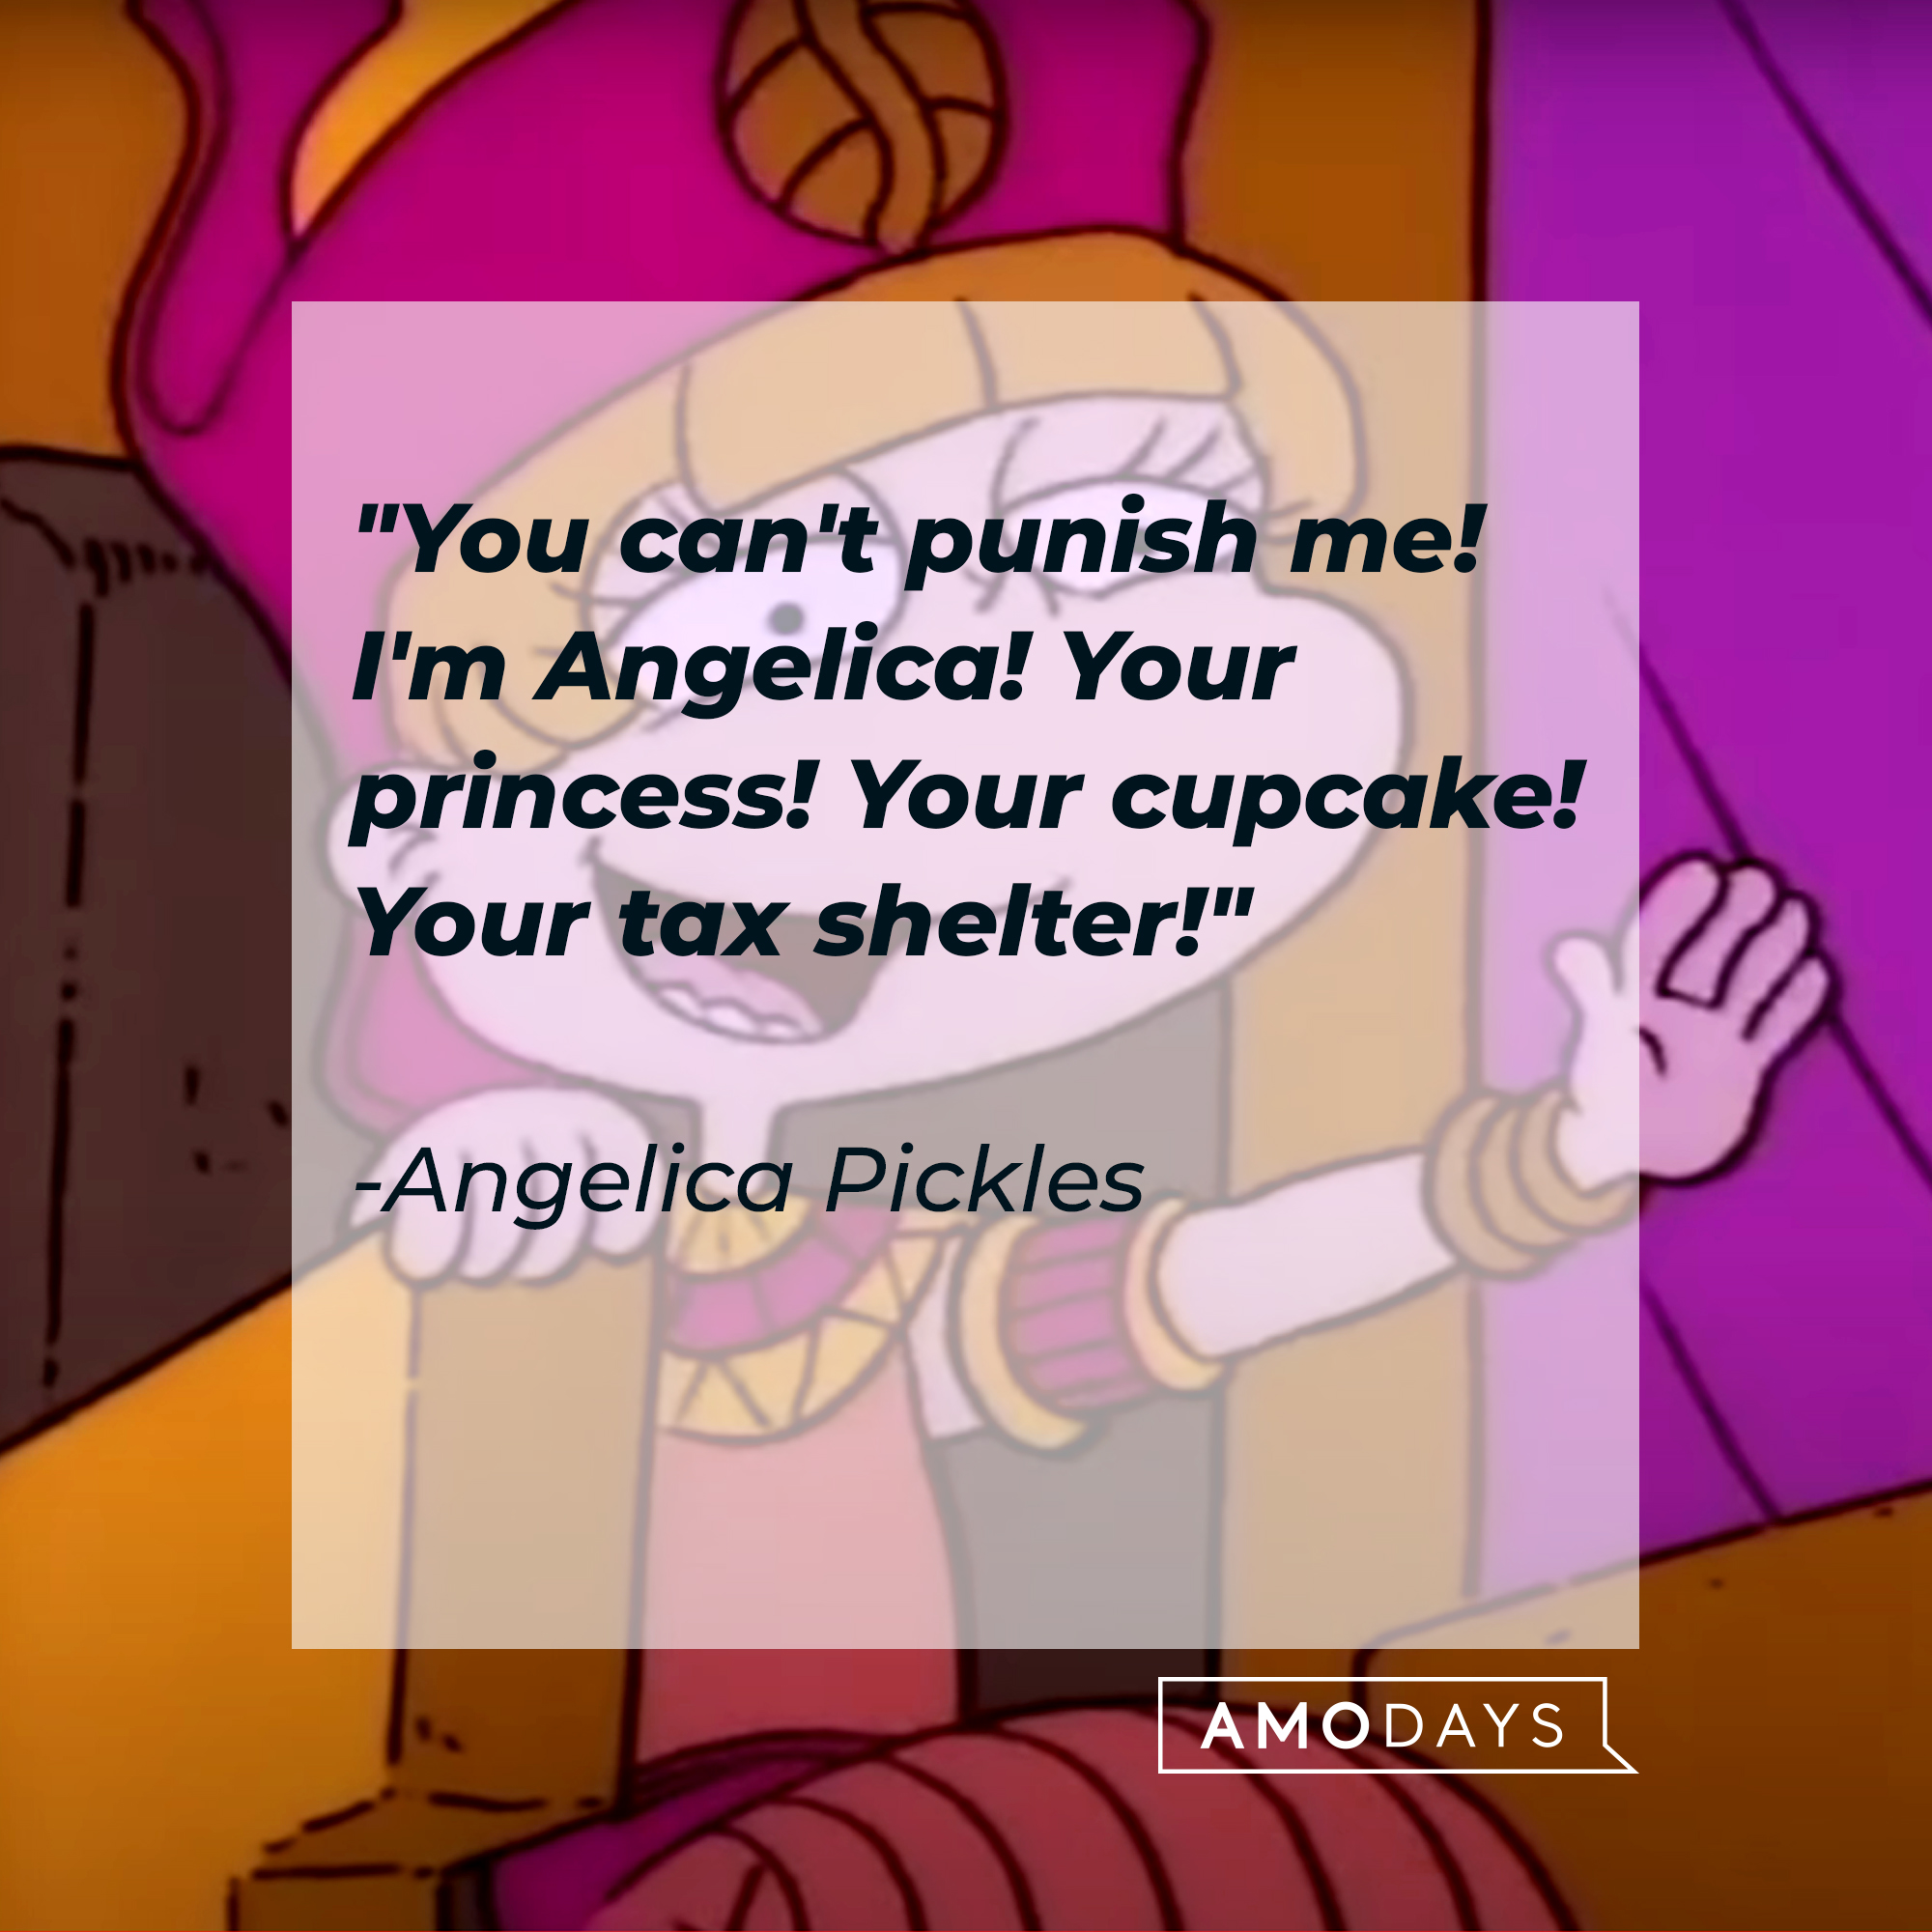 Angelica Pickles’ quote: "You can't punish me! I'm Angelica! Your princess! Your cupcake! Your tax shelter! | Source: Facebook/Rugrats